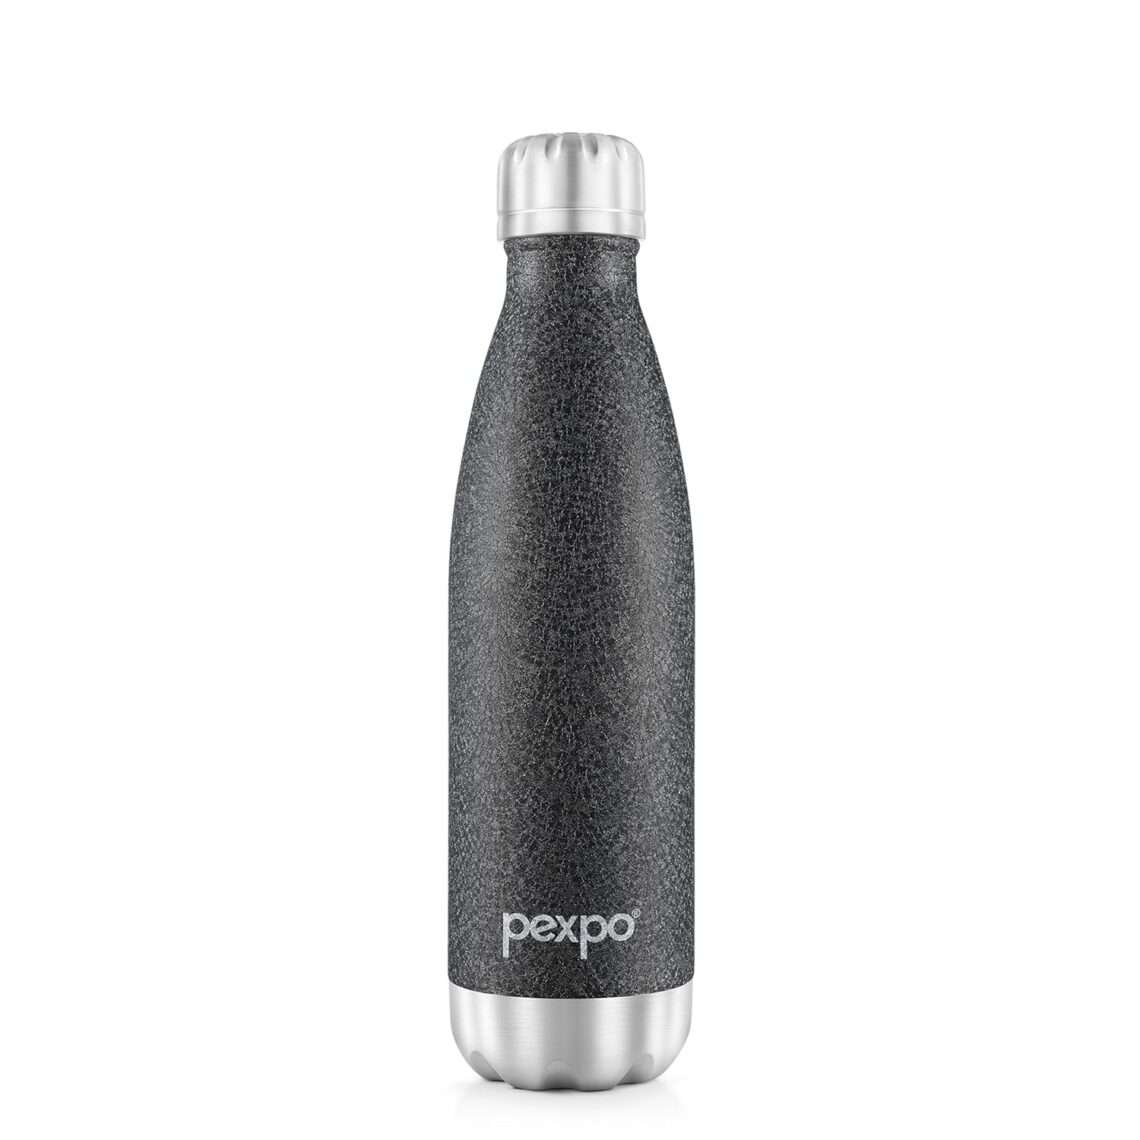 PEXPO Electro, stainless steel water bottle, insulated water bottle, hot water bottle, cold water bottle, ISI Certified, Tri-Ply Vacuum Technology, 304 stainless steel, leakproof, travel-friendly